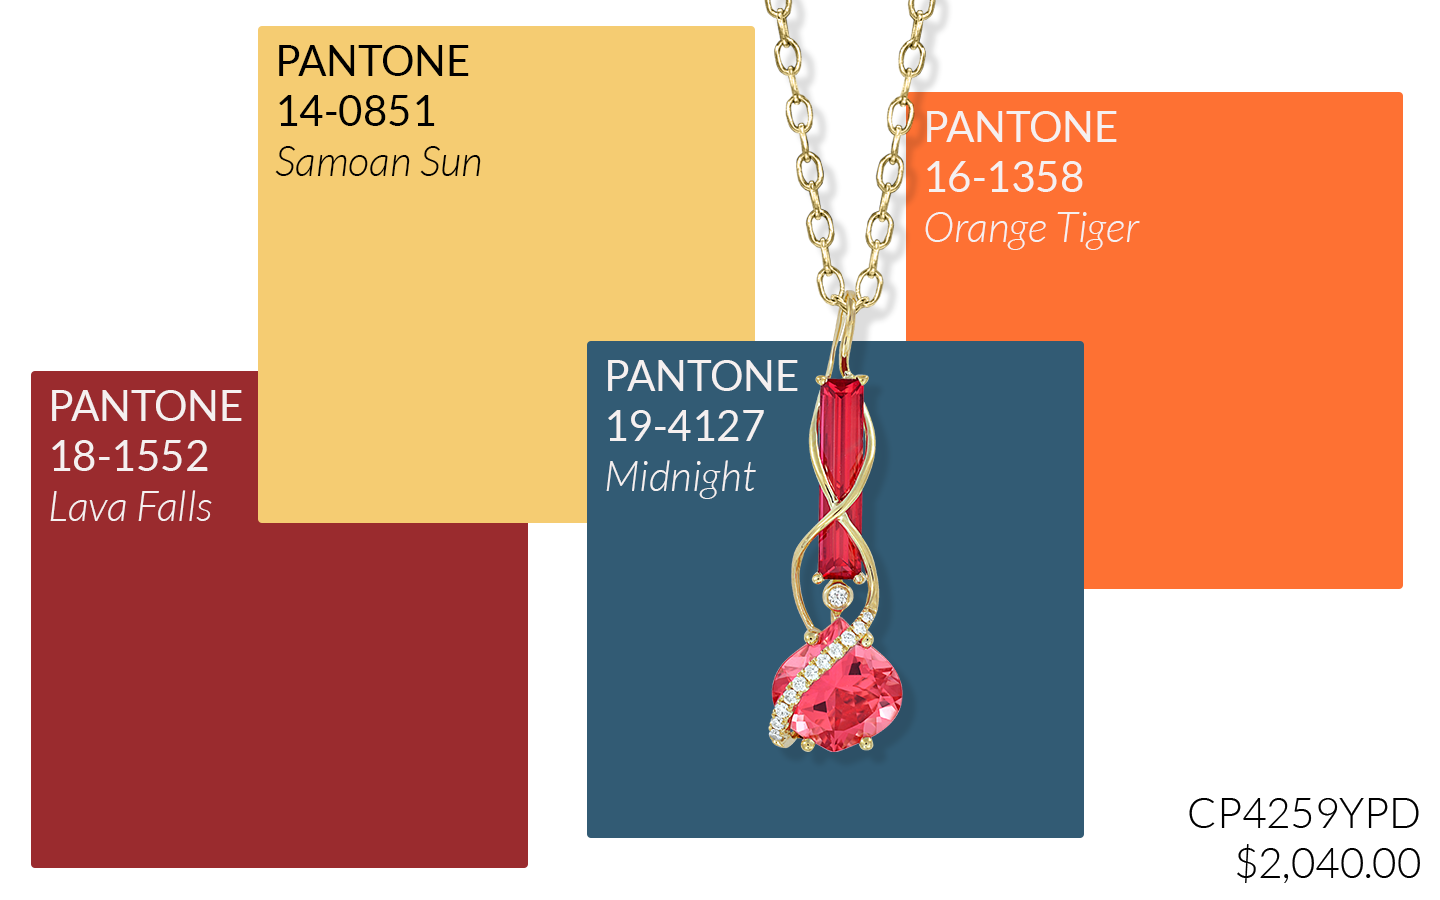 Lab grown padparadscha pendant: CP4259YPD, $2,040.00